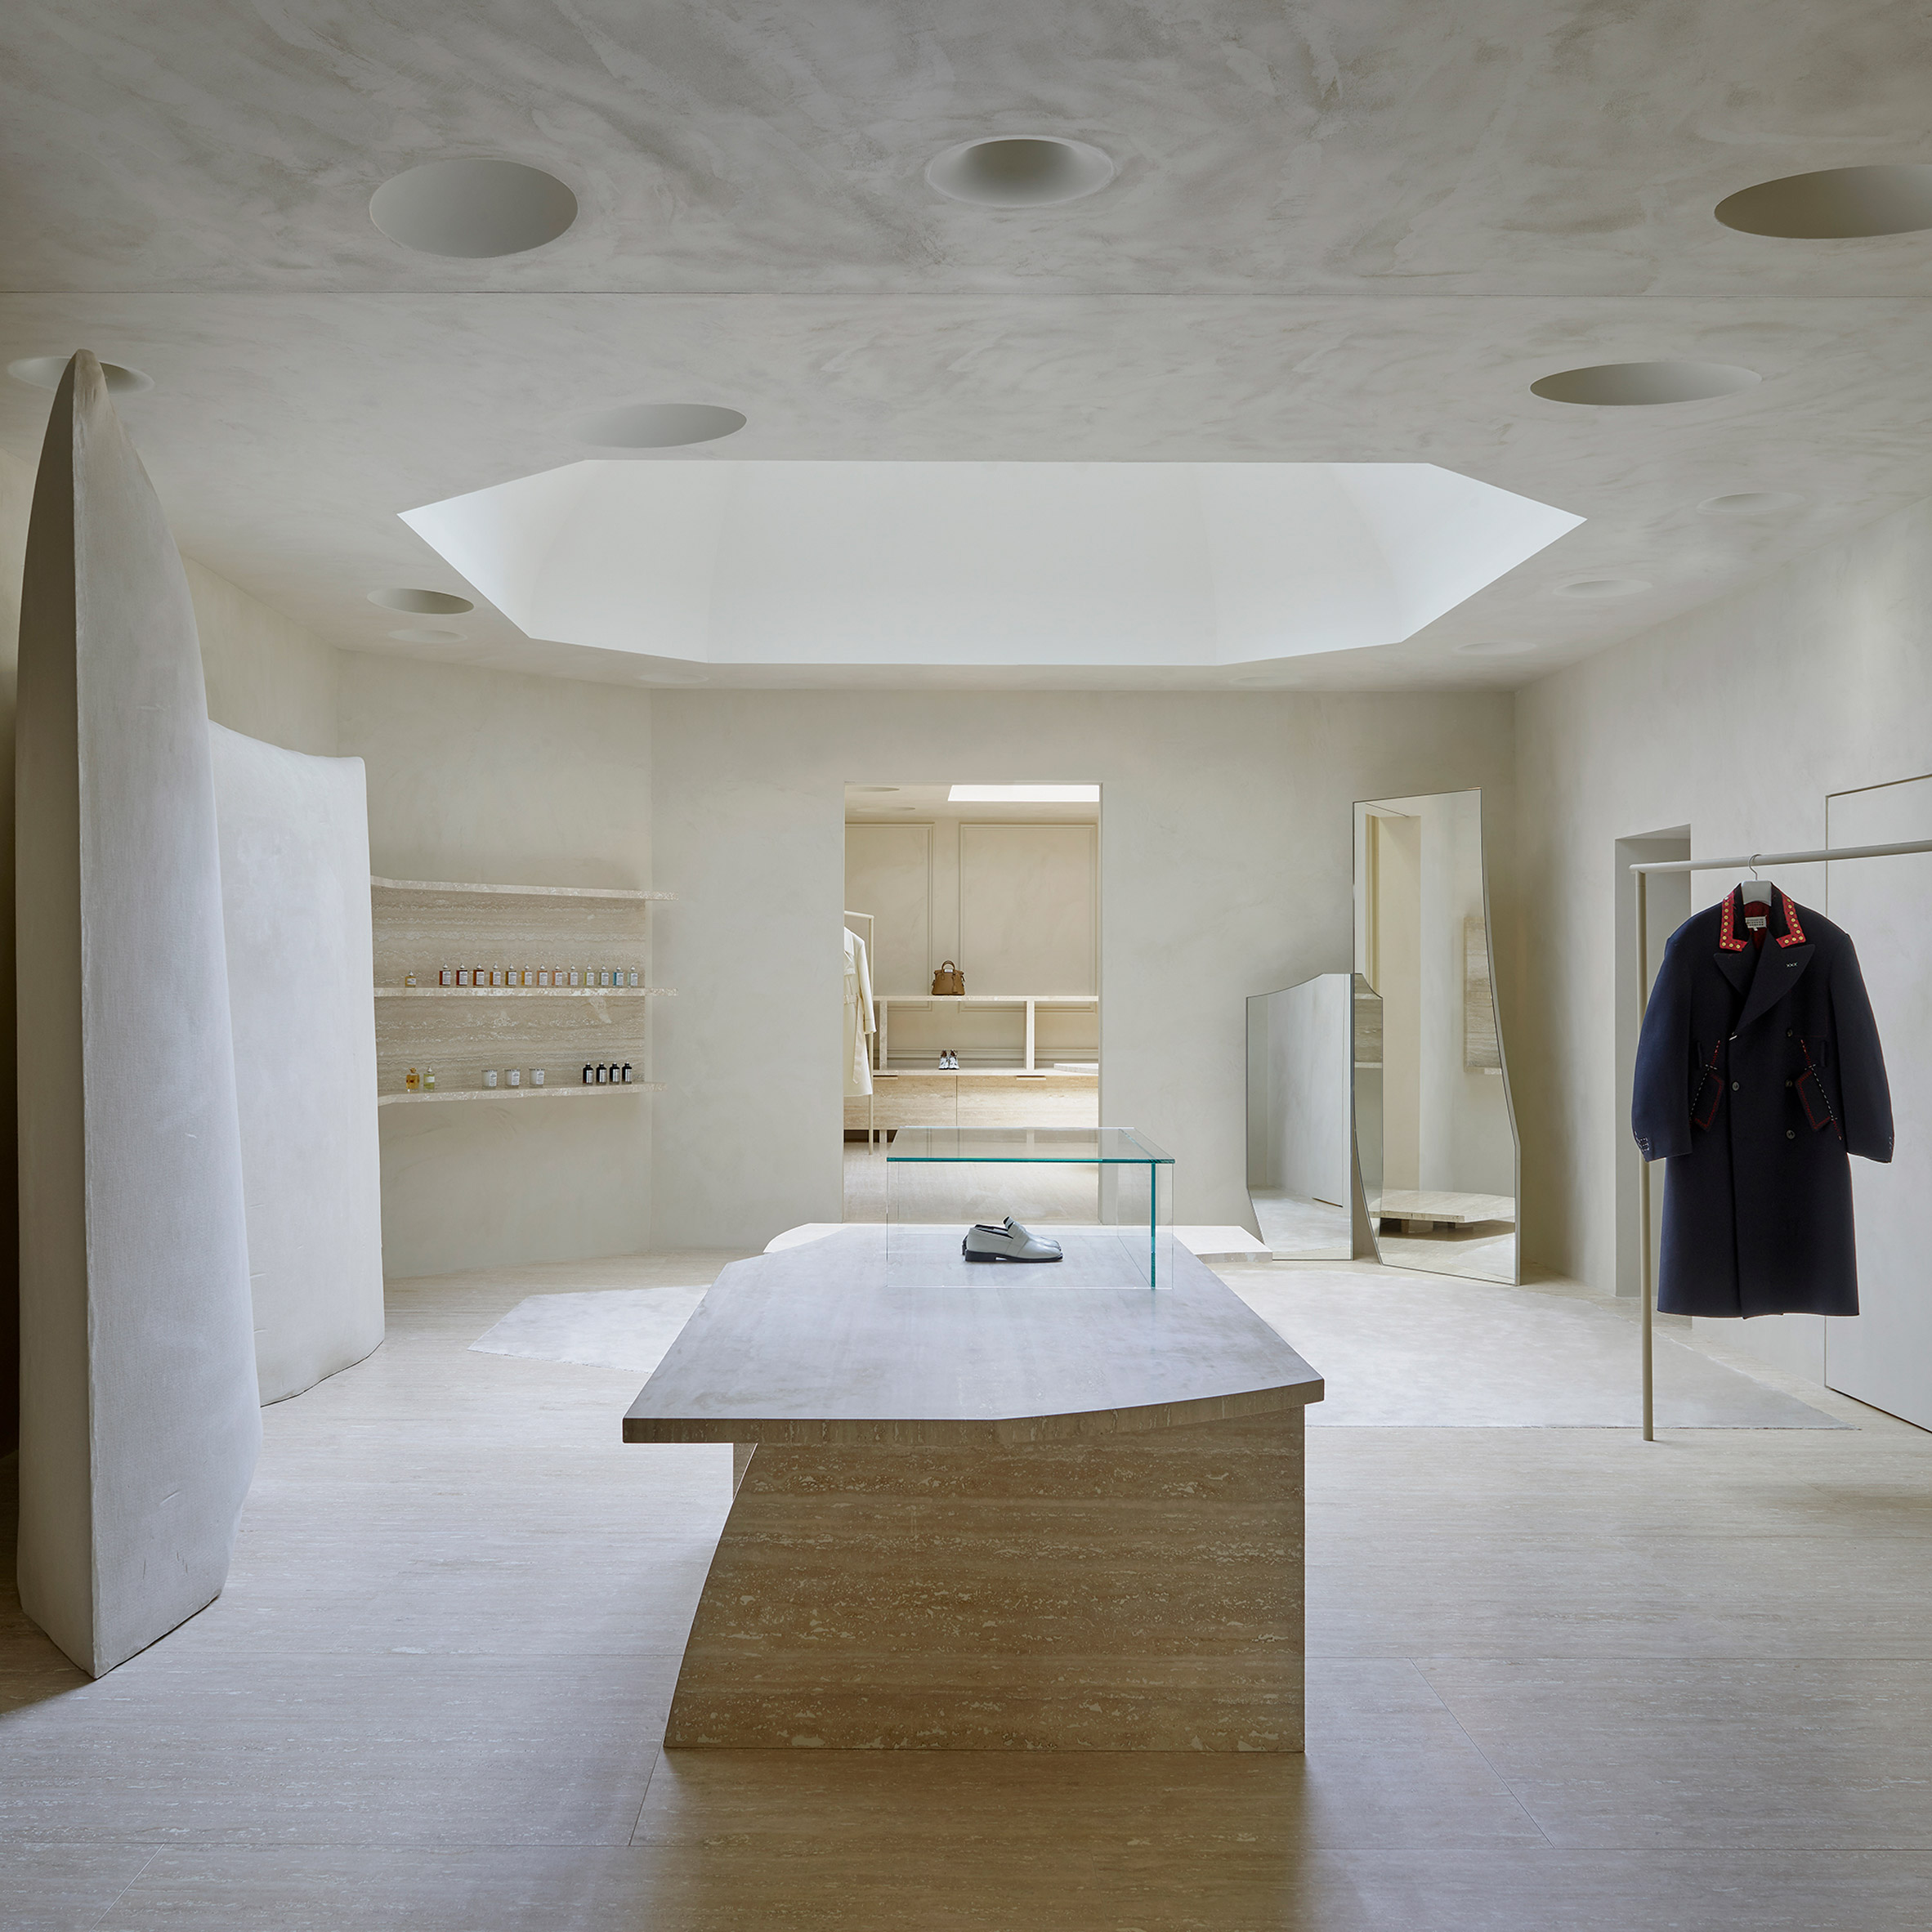 Canal entregar Colibrí Anne Holtrop creates walls that look like fabric for Maison Margiela store